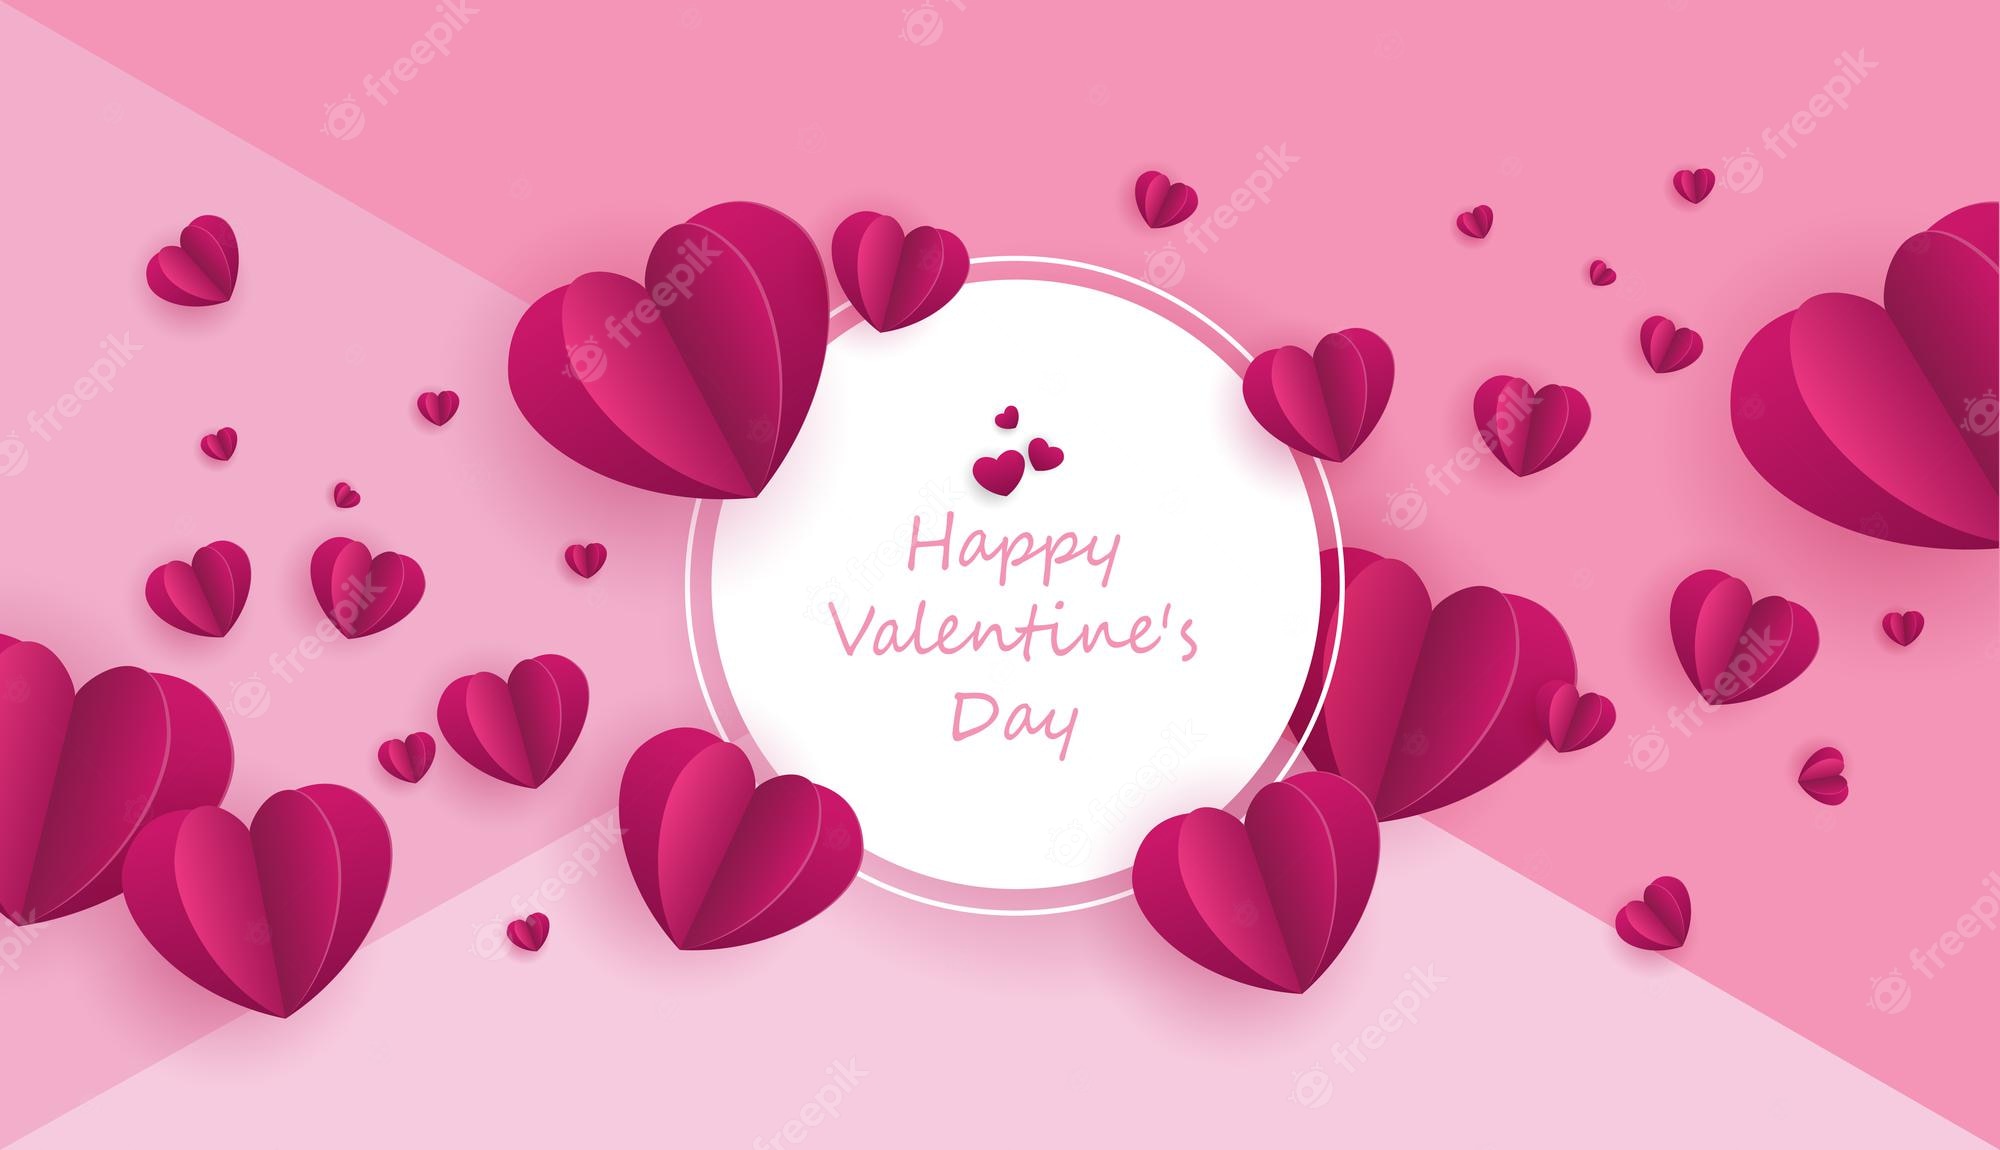 Premium Vector. Paper art of love and valentine day with paper heart on the blue sky can be used for wallpaper